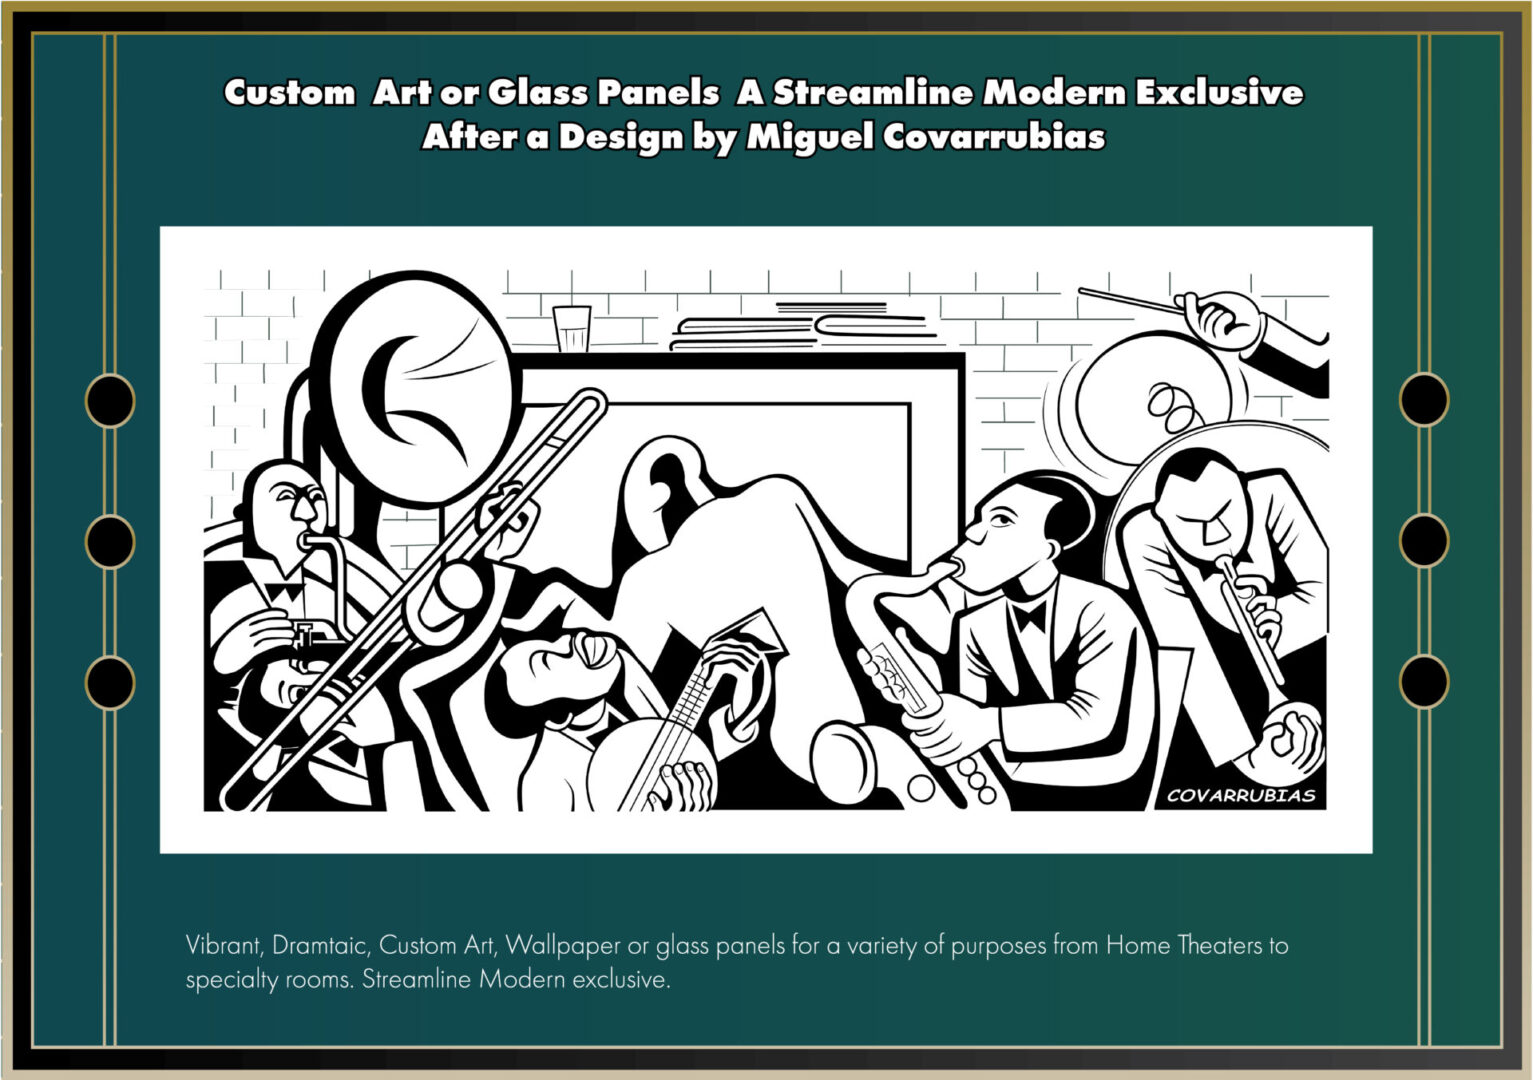 Jazz musicians in action design by Miguel Covarrubias